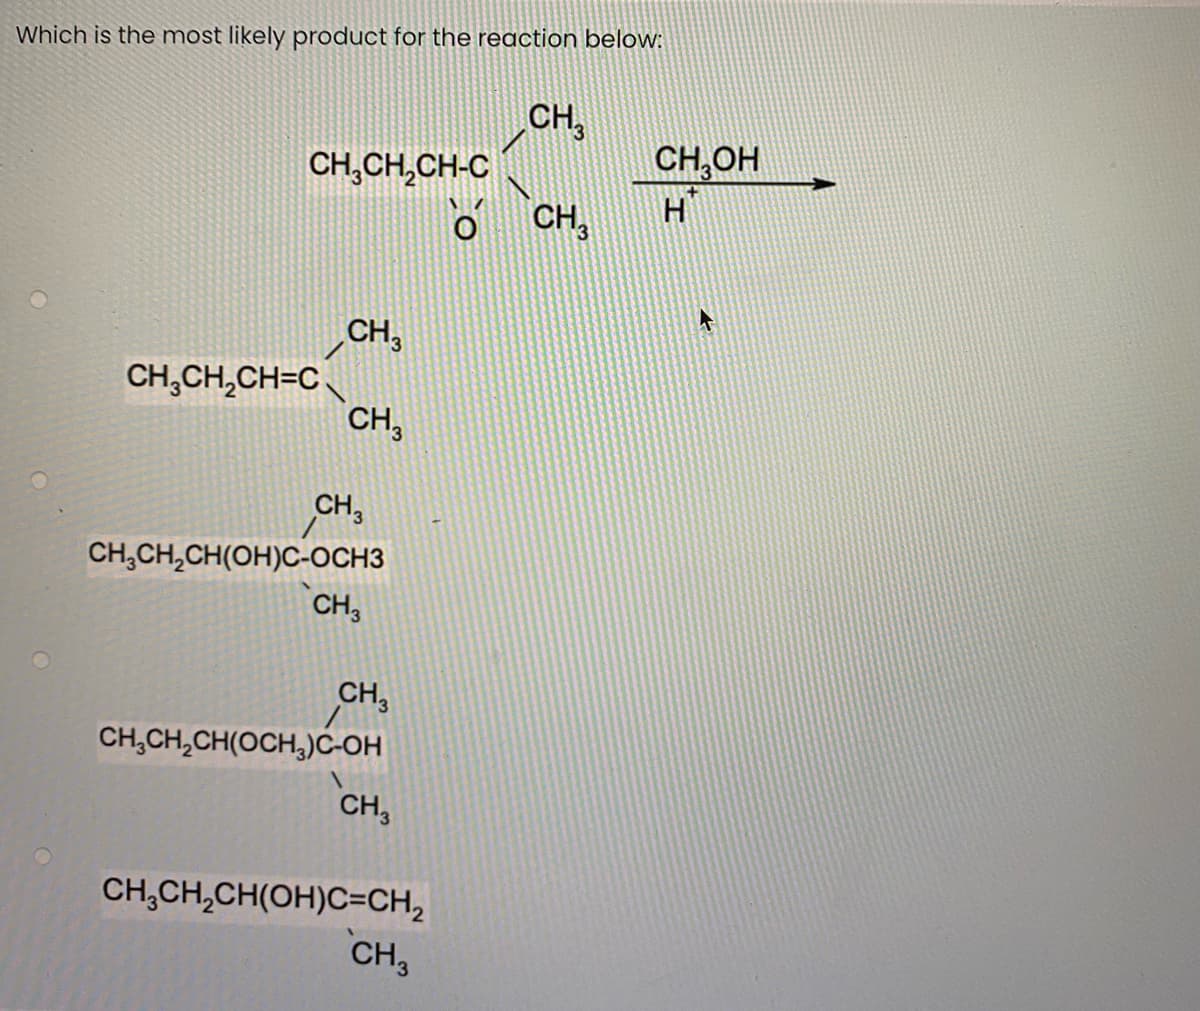 Which is the most likely product for the reaction below:
CH,
CH,OH
CH,CH,CH-C
CH,
H
CH,
CH,CH,CH=C
CH,
CH,
CH,CH,CH(OH)C-OCH3
CH,
CH,
CH,CH,CH(OCH,)Ć-OH
CH,
CH,CH,CH(OH)C=CH,
CH,
